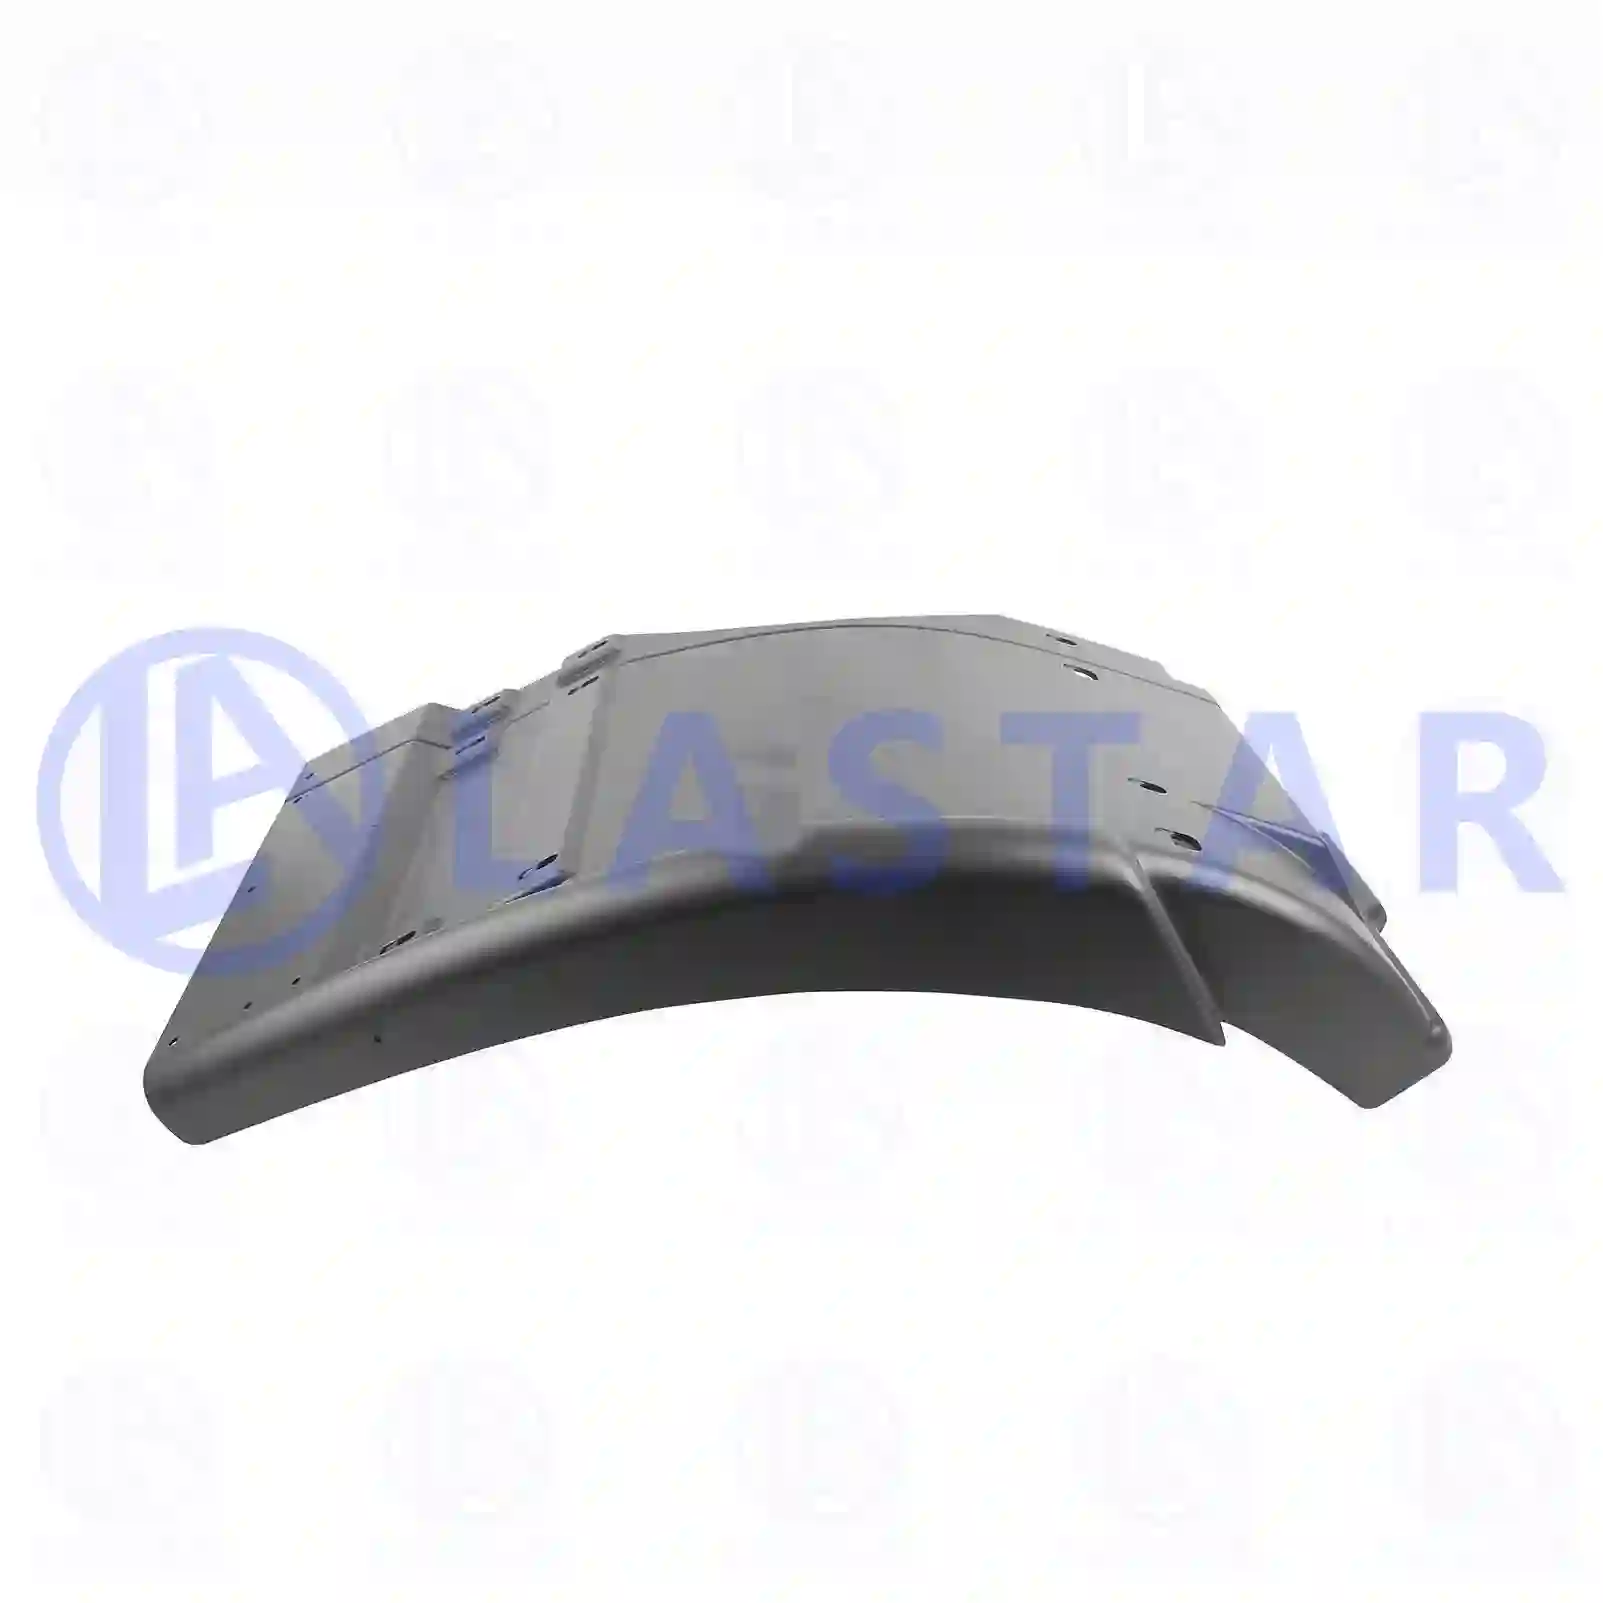 Front fender, right, 77720754, 8144469, 8144469 ||  77720754 Lastar Spare Part | Truck Spare Parts, Auotomotive Spare Parts Front fender, right, 77720754, 8144469, 8144469 ||  77720754 Lastar Spare Part | Truck Spare Parts, Auotomotive Spare Parts